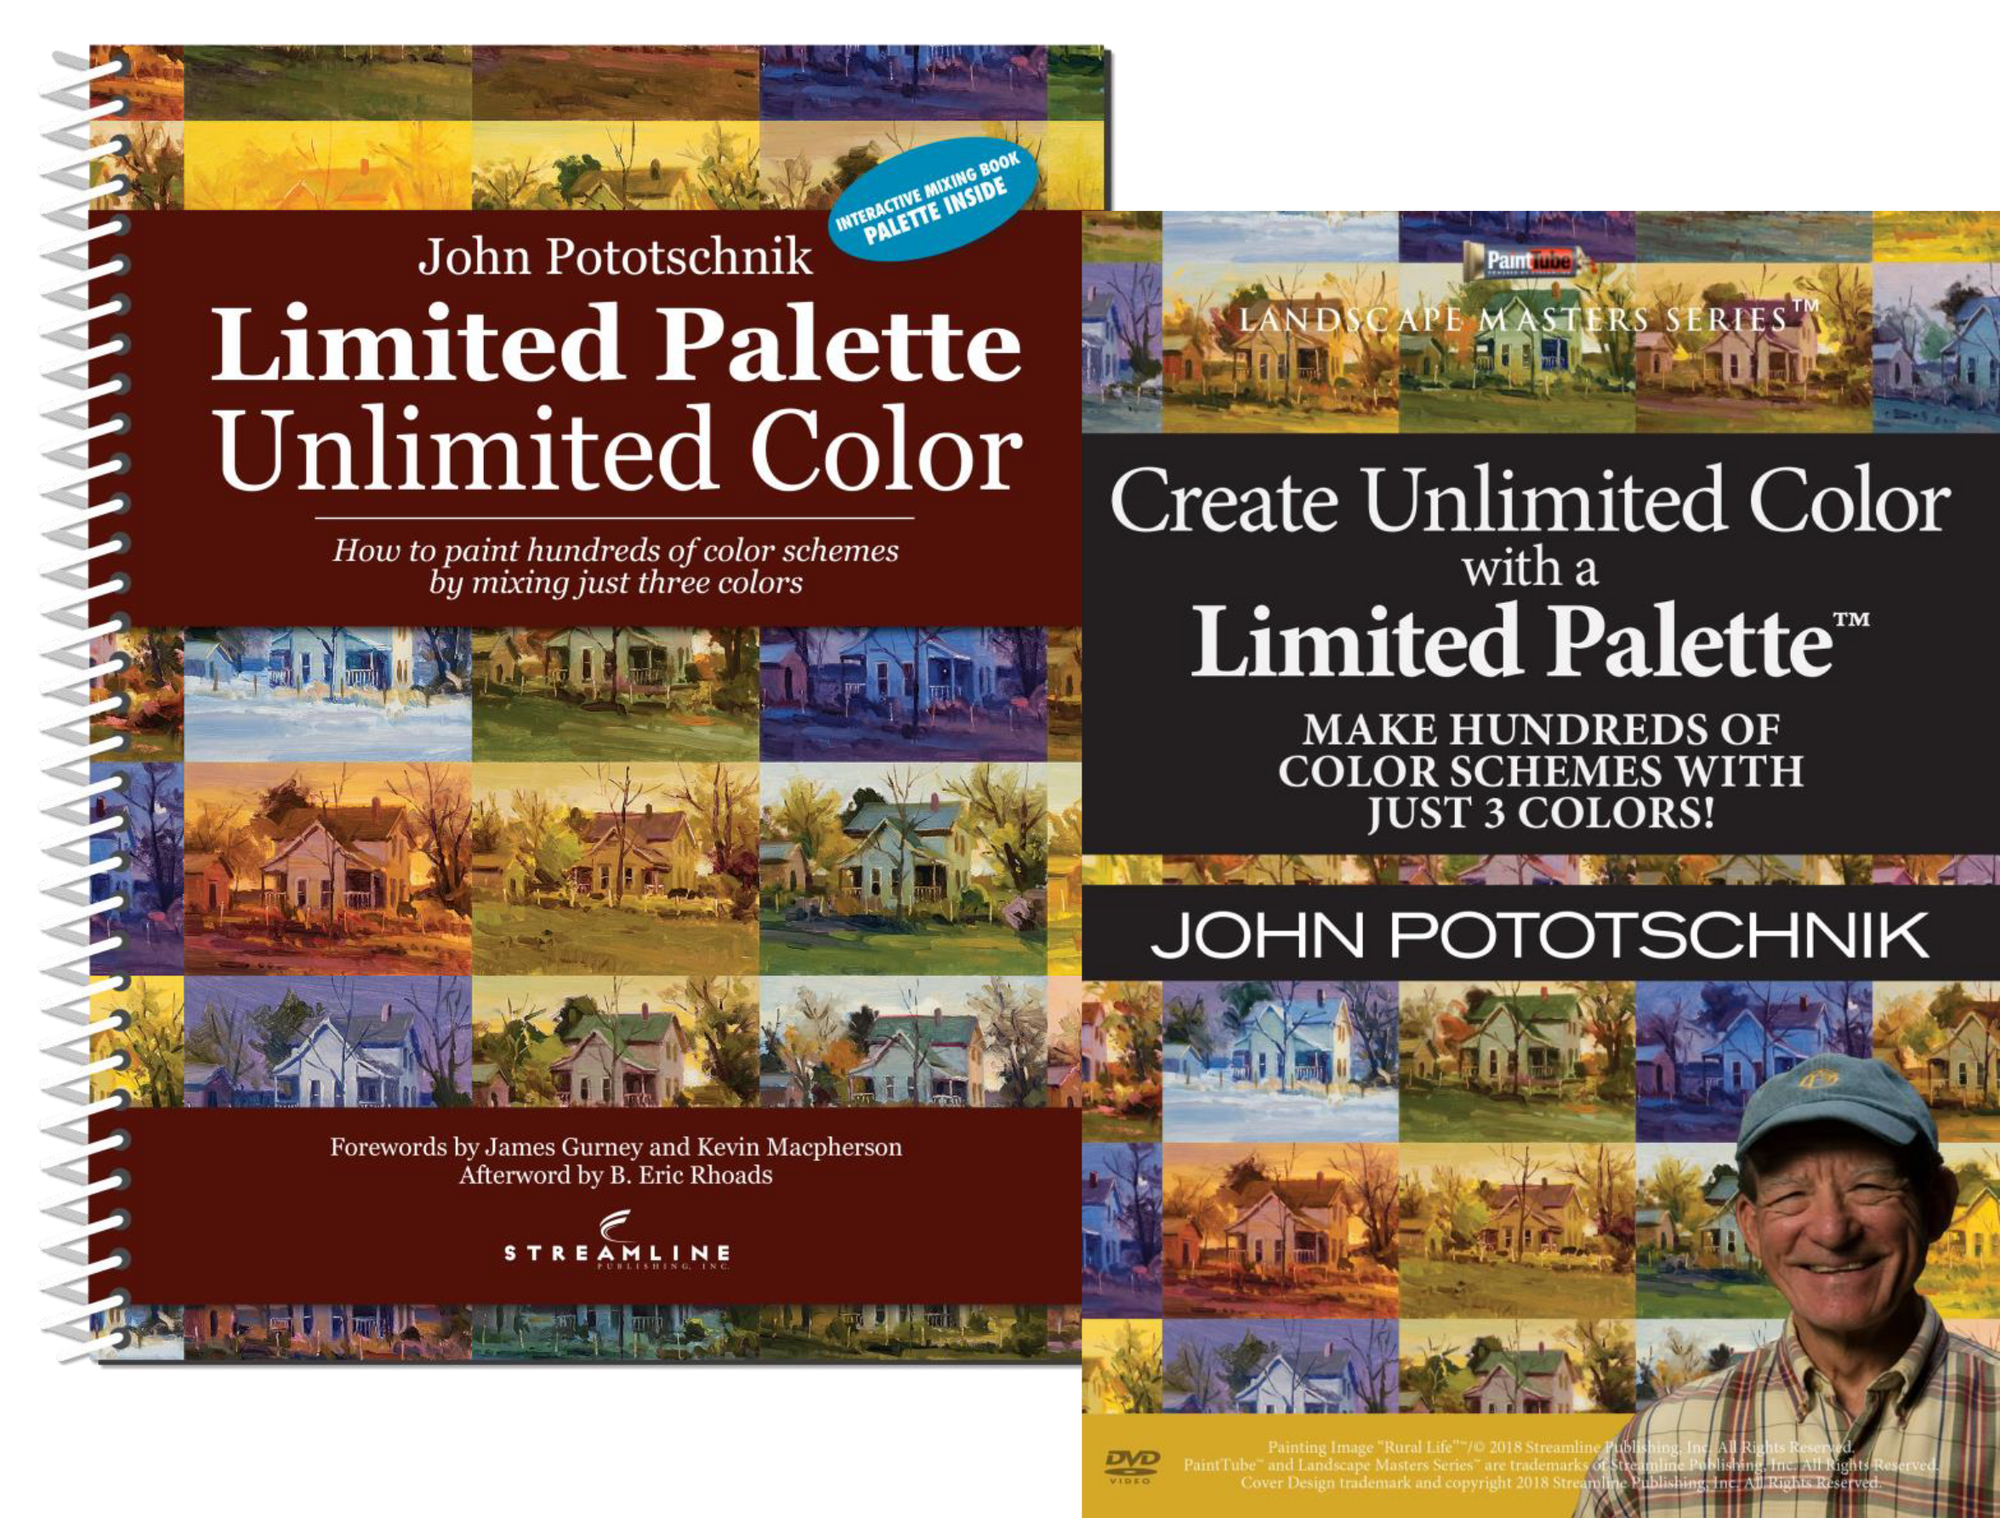 John Pototschnik: Unlimited Color with a Limited Palette - DVD/Book Combo